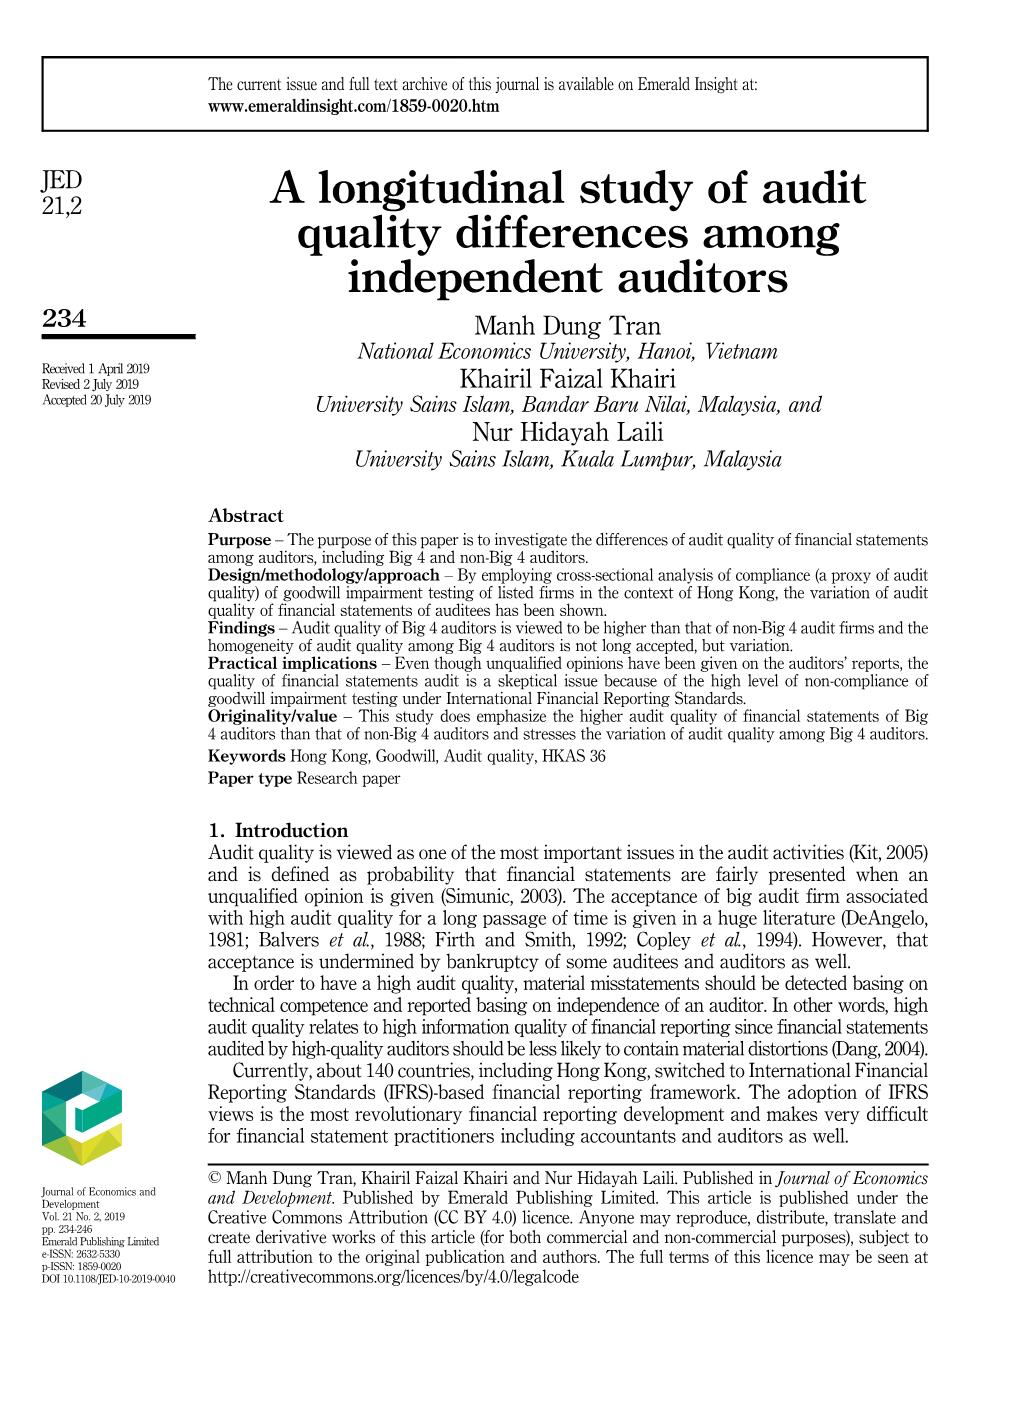 A longitudinal study of audit quality differences among independent auditors trang 1